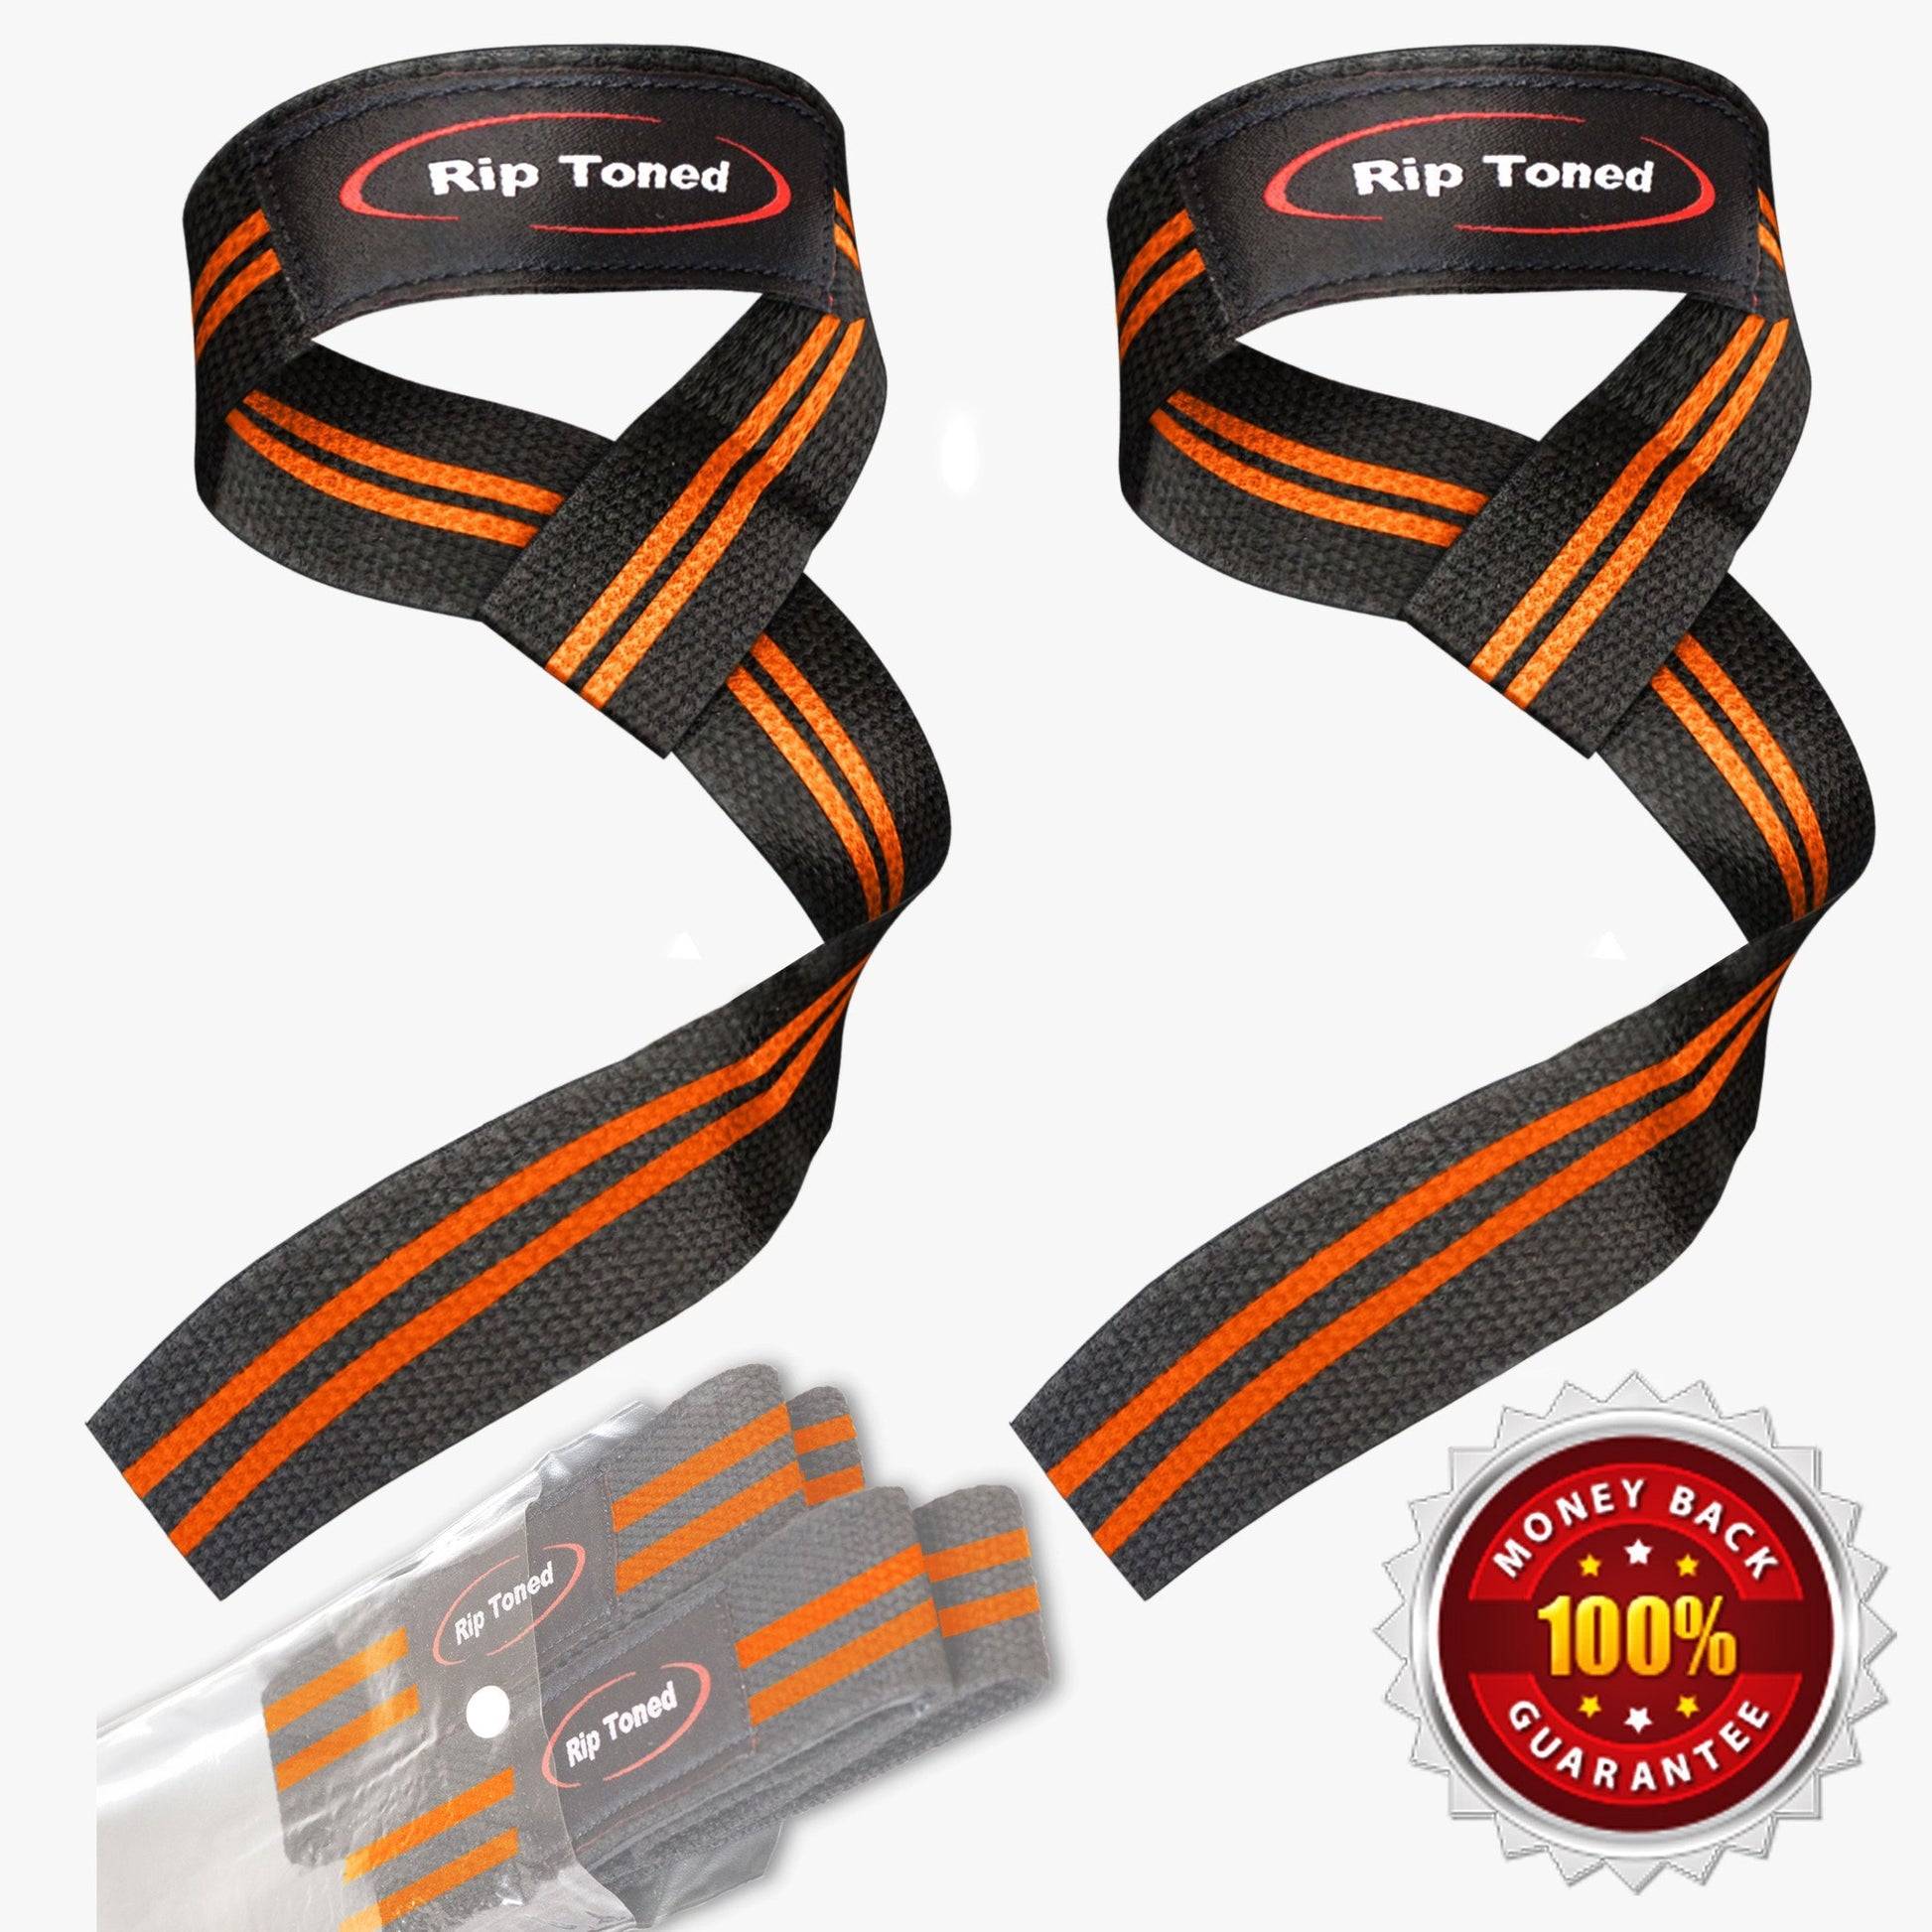 Rip Toned Weightlifting Back Support Belt